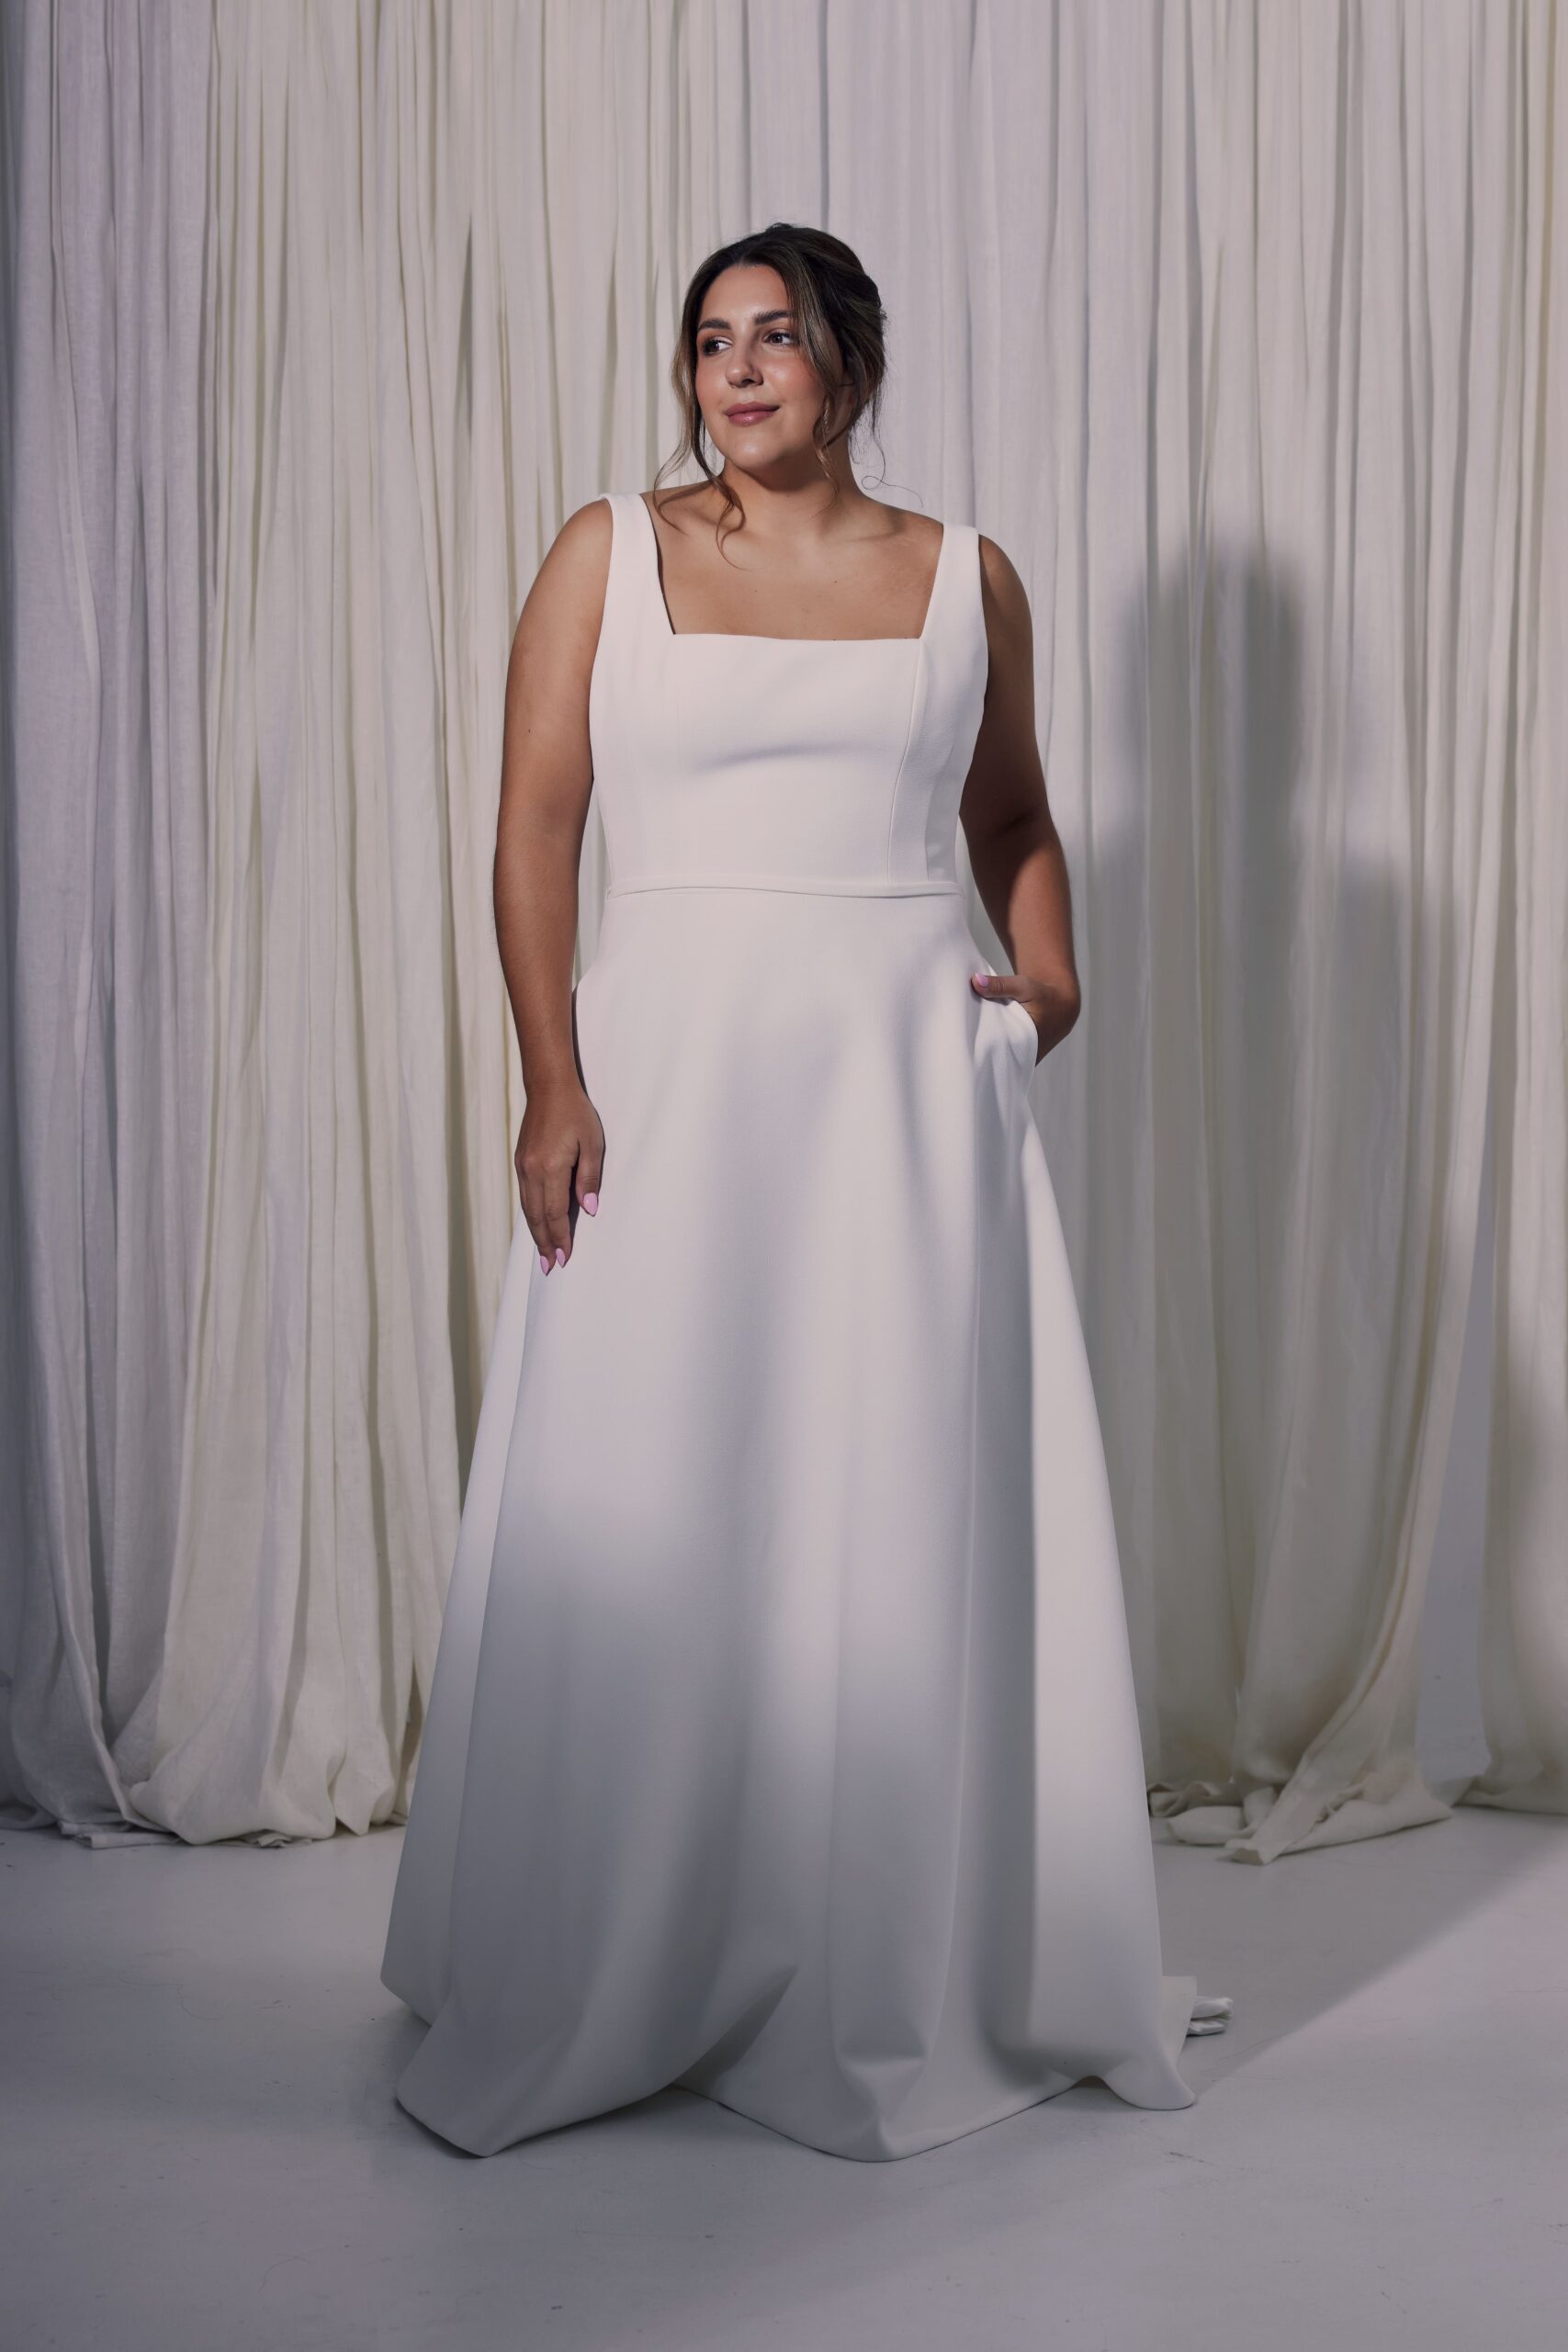 The Tora gown - a double crepe A-line gown with a square neckline.